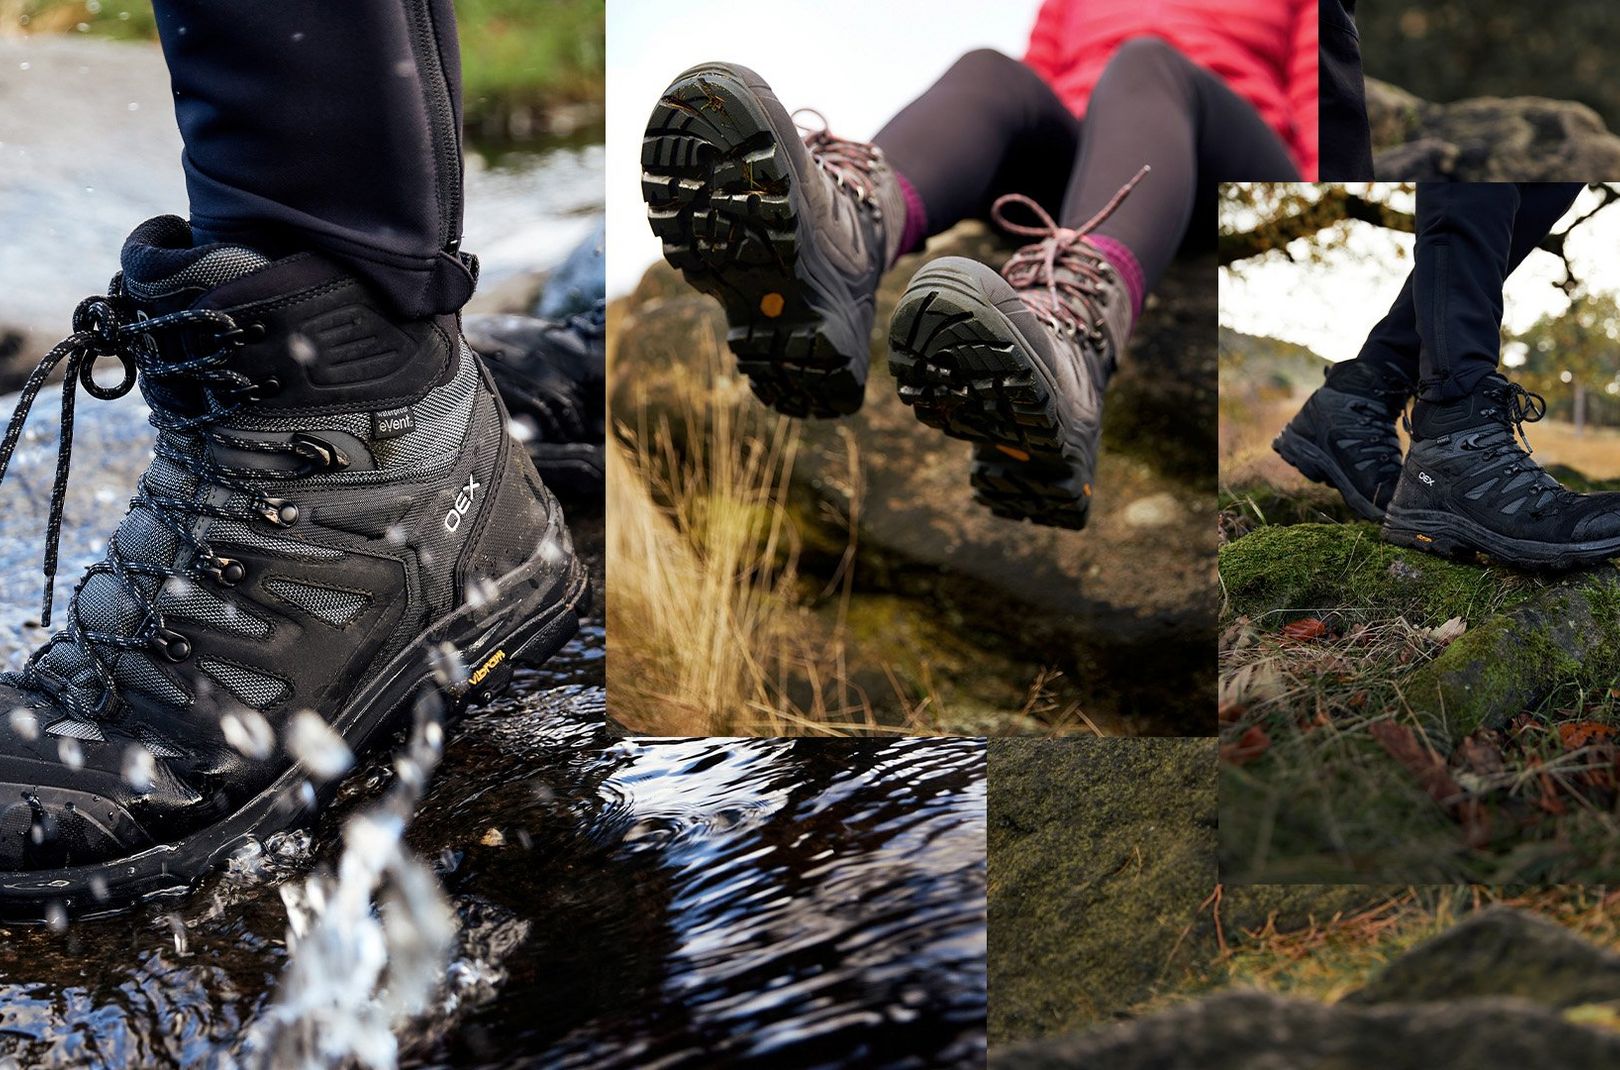 A collage of the OEX Crusade walking boots in men's and women's styles on a hike in the Peak District, UK